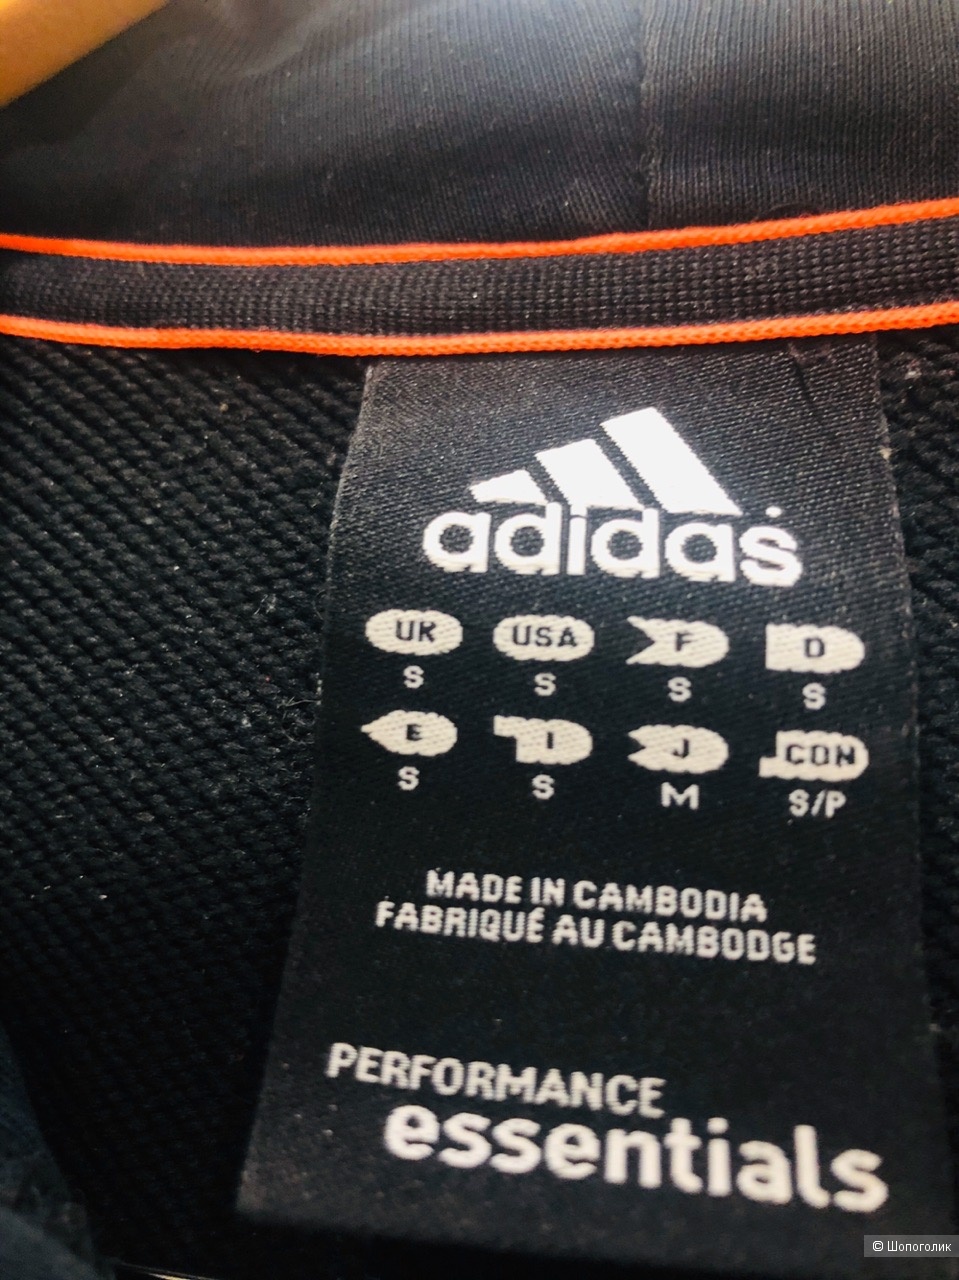 ХУДИ" ADIDAS MUST HAVES BADGE OF SPORT"Размер S-M.